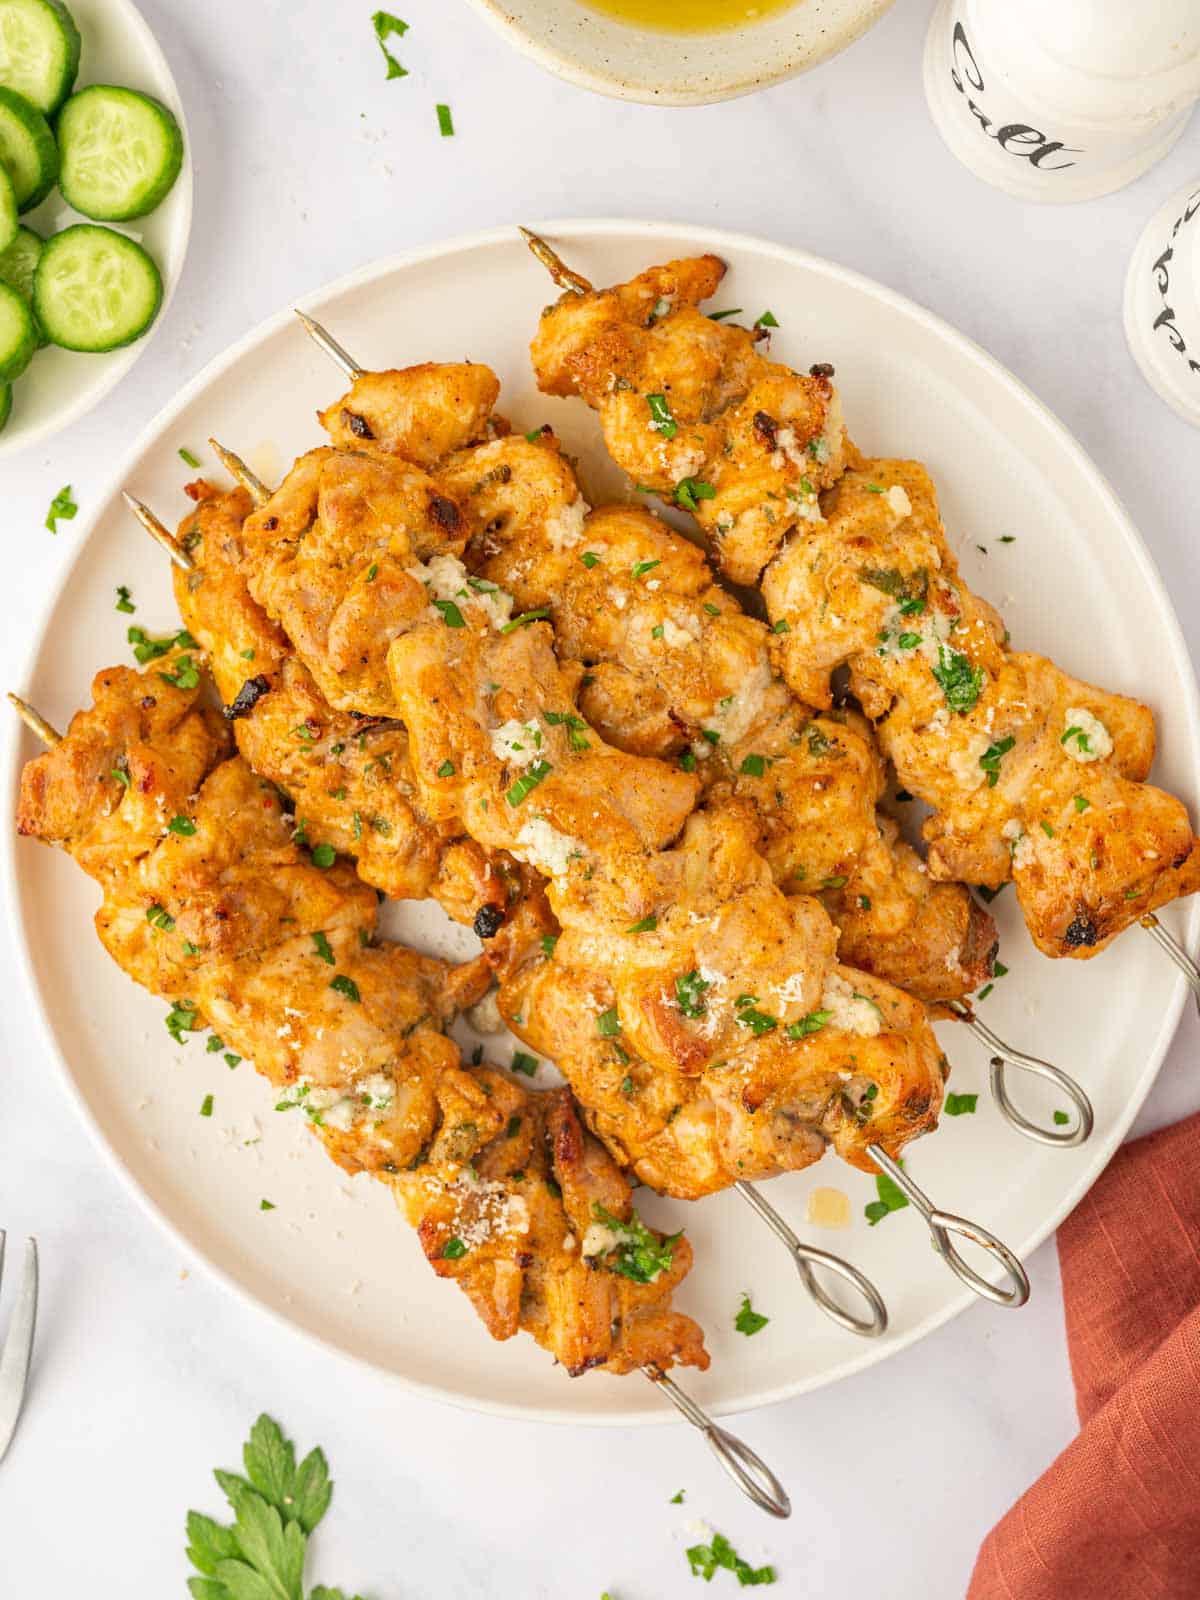 Baked chicken skewers on a platter.